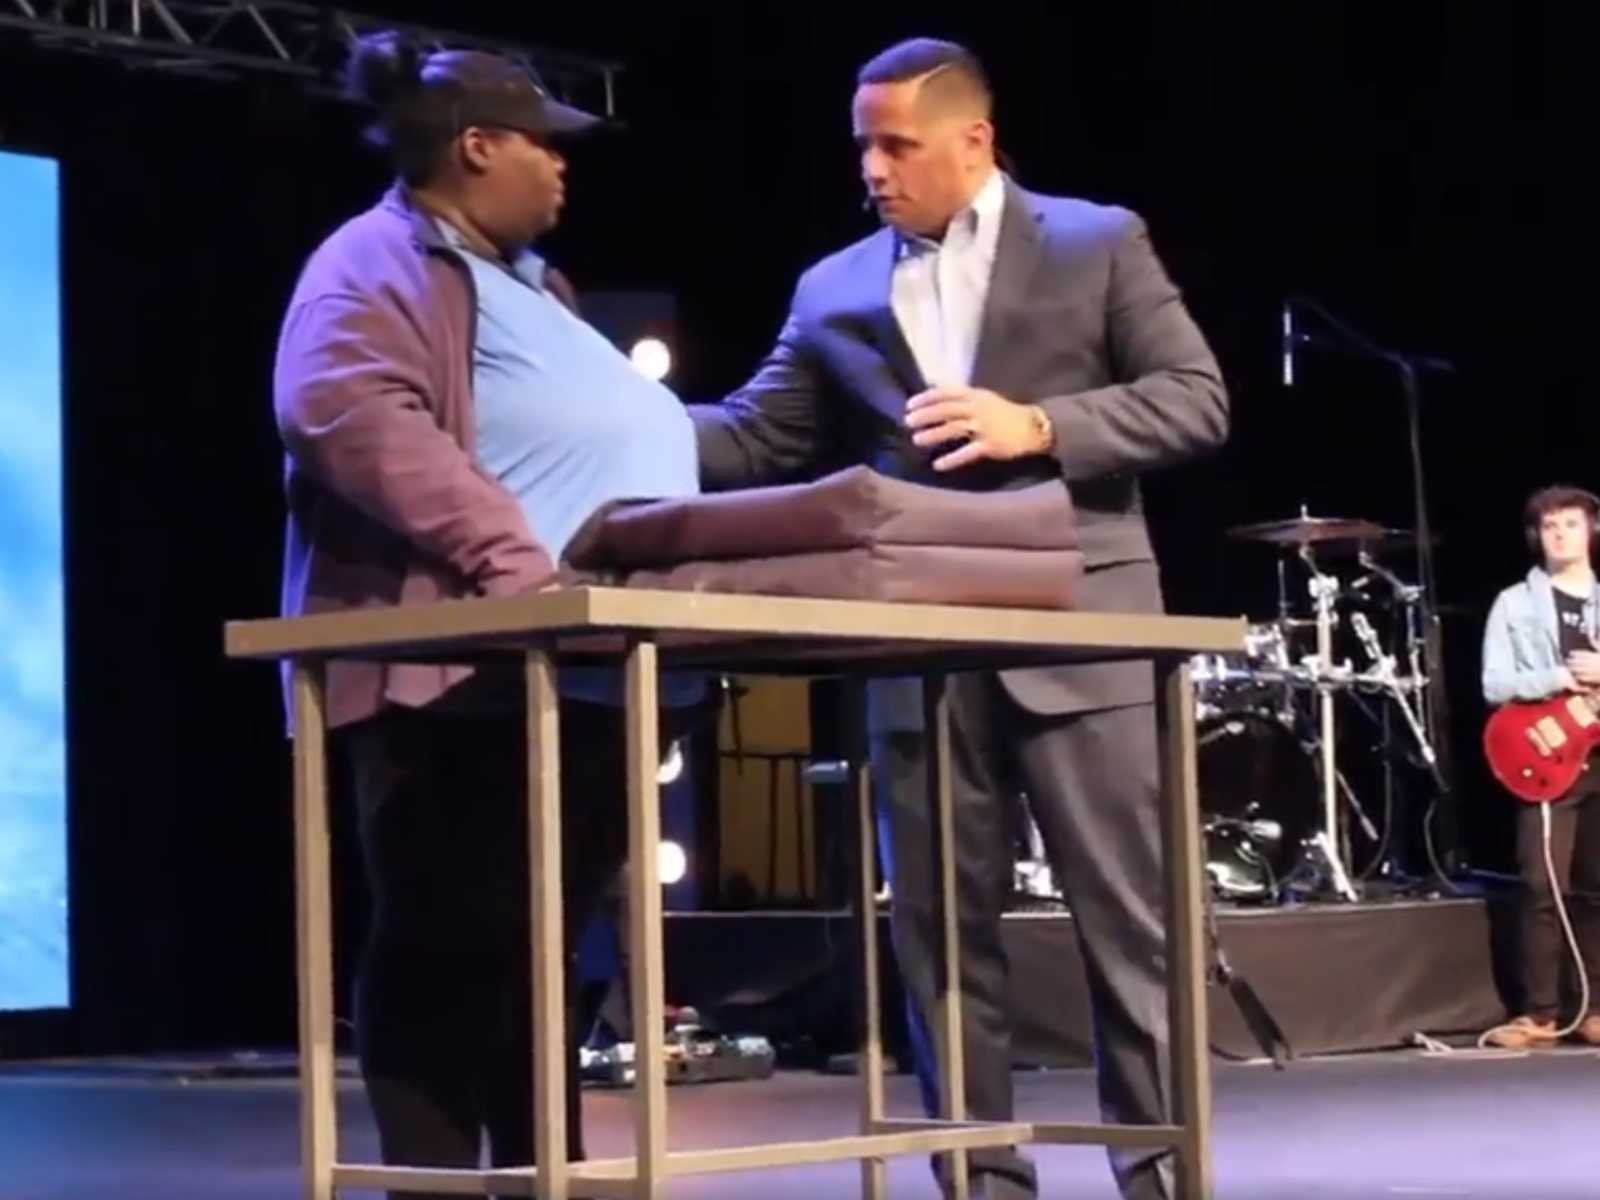 Single parent who works as a pizza deliverer standing on stage at church with pastor